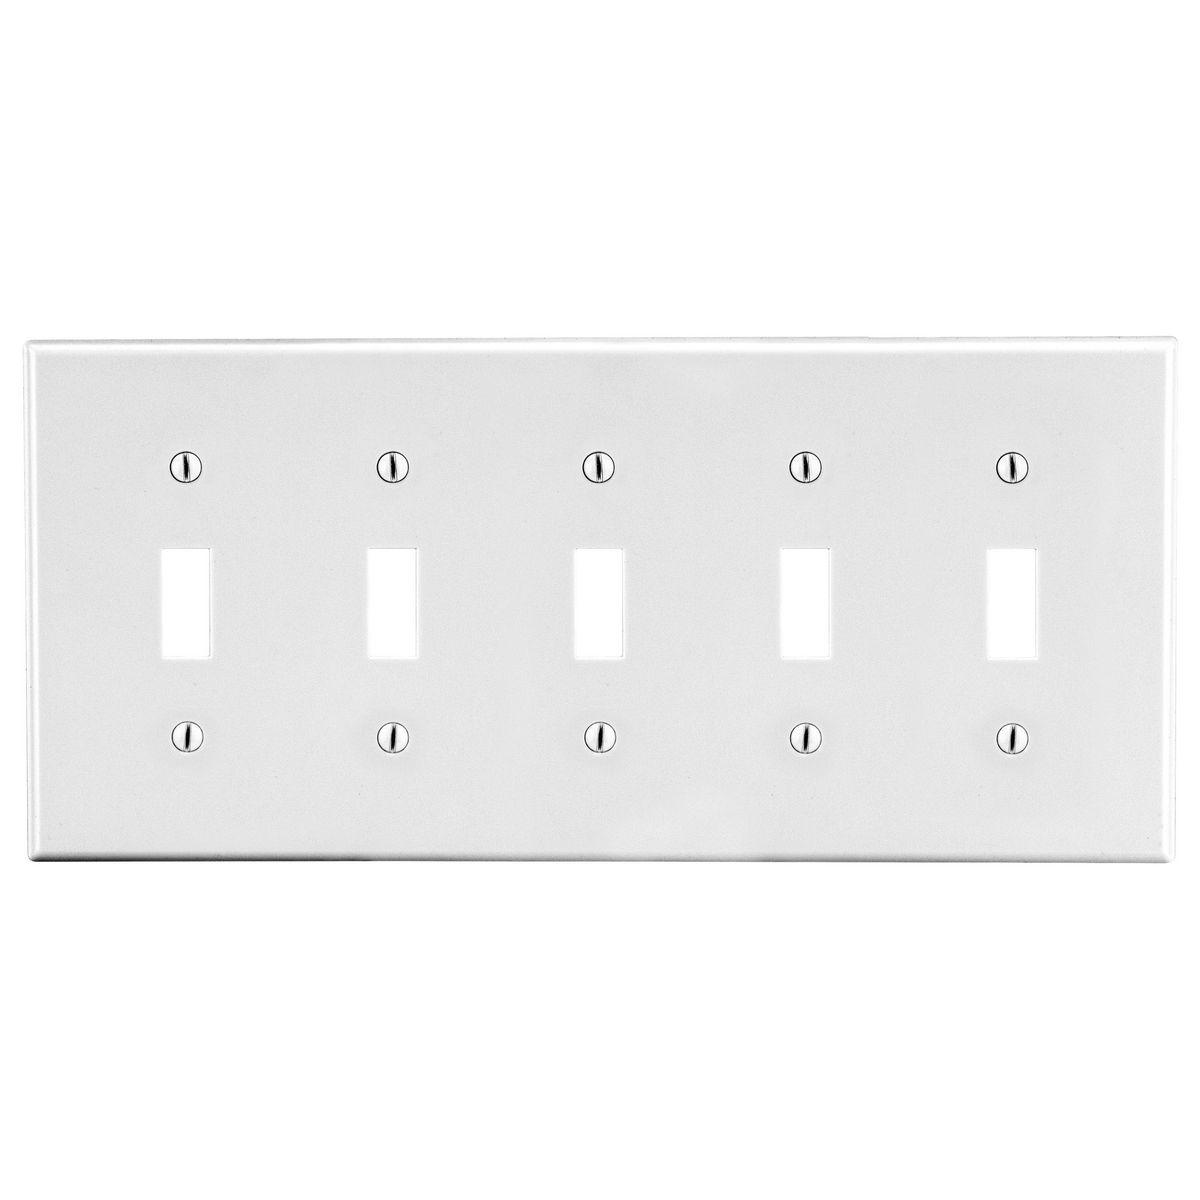 Hubbell P5W Wallplate, 5-Gang, 5) Toggle,  White  ; High-impact, self-extinguishing polycarbonate material ; More Rigid ; Sharp lines and less dimpling ; Smooth satin finish ; Blends into wall with an optimum finish ; Smooth Satin Finish